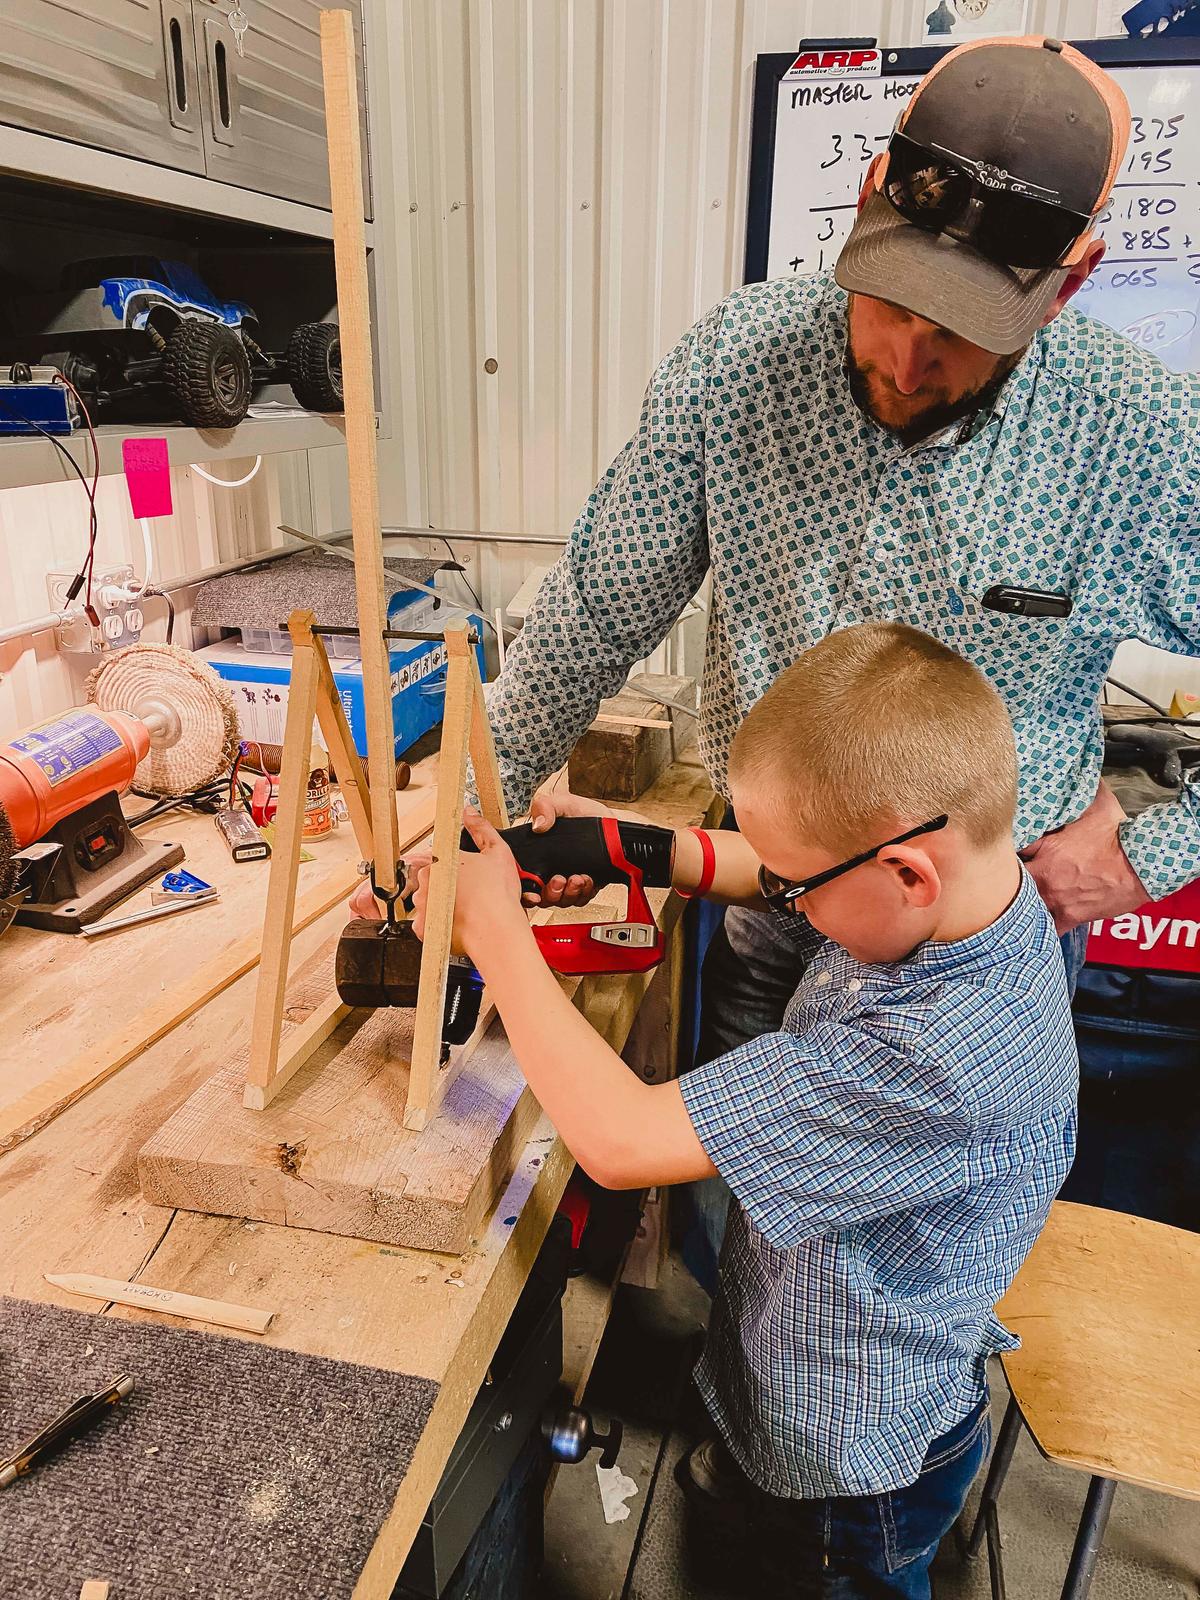 Bridger, 10, loves creating things. The family calls him a little builder who is full of innovative ideas and curiosity. (Courtesy of <a href="https://www.theprairiehomestead.com/">Jill Winger</a>)